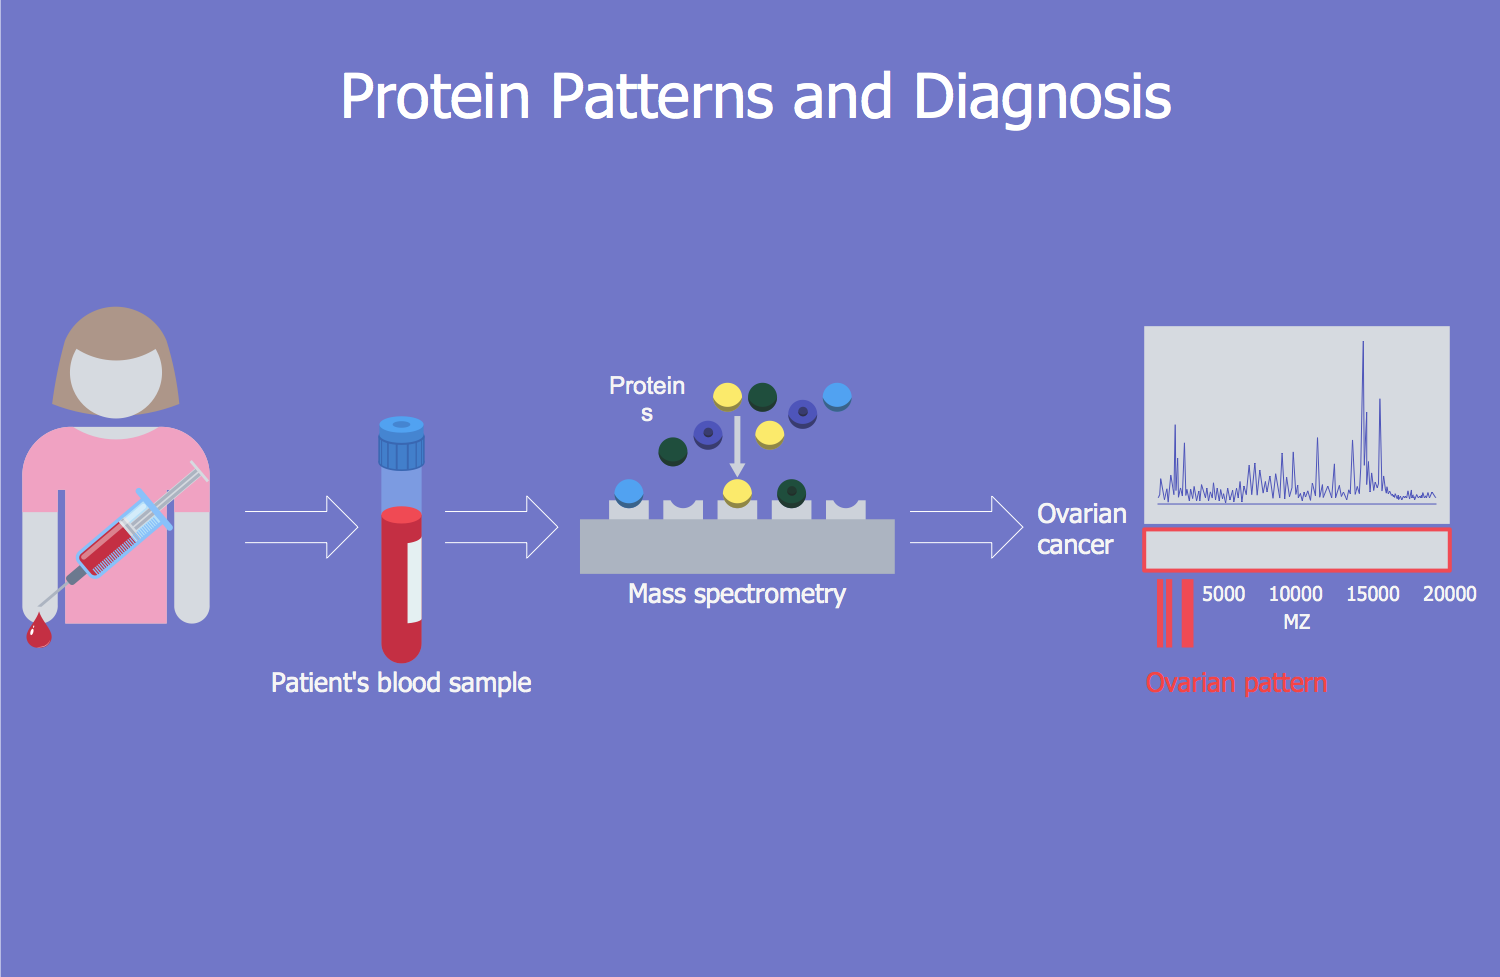 Protein Patterns and Diagnosis